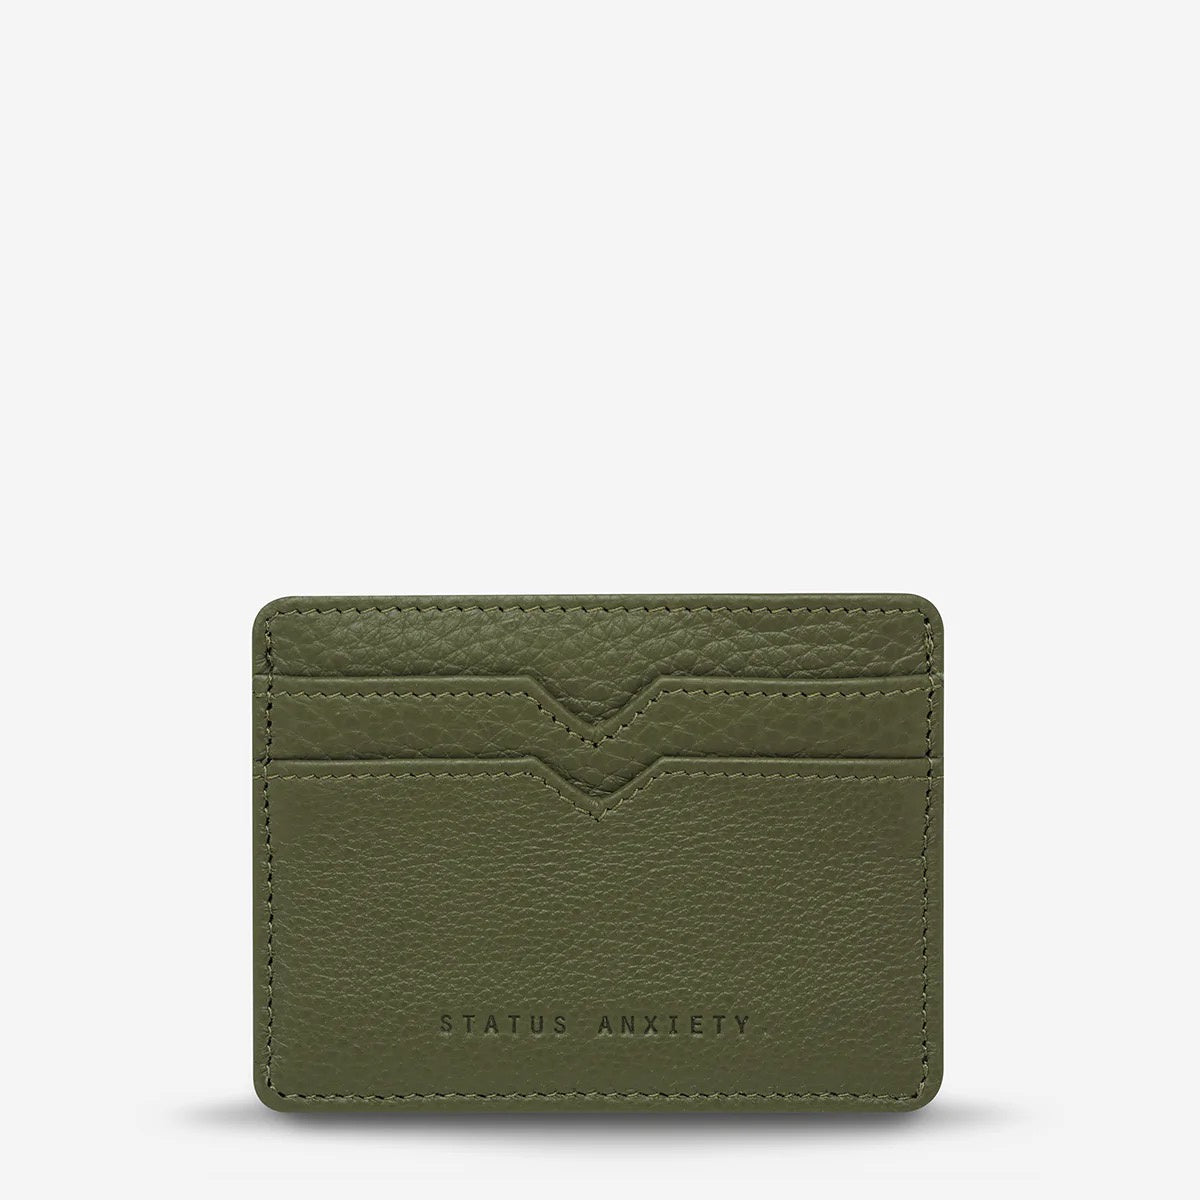 Status Anxiety - Together For Now Wallet - Khaki